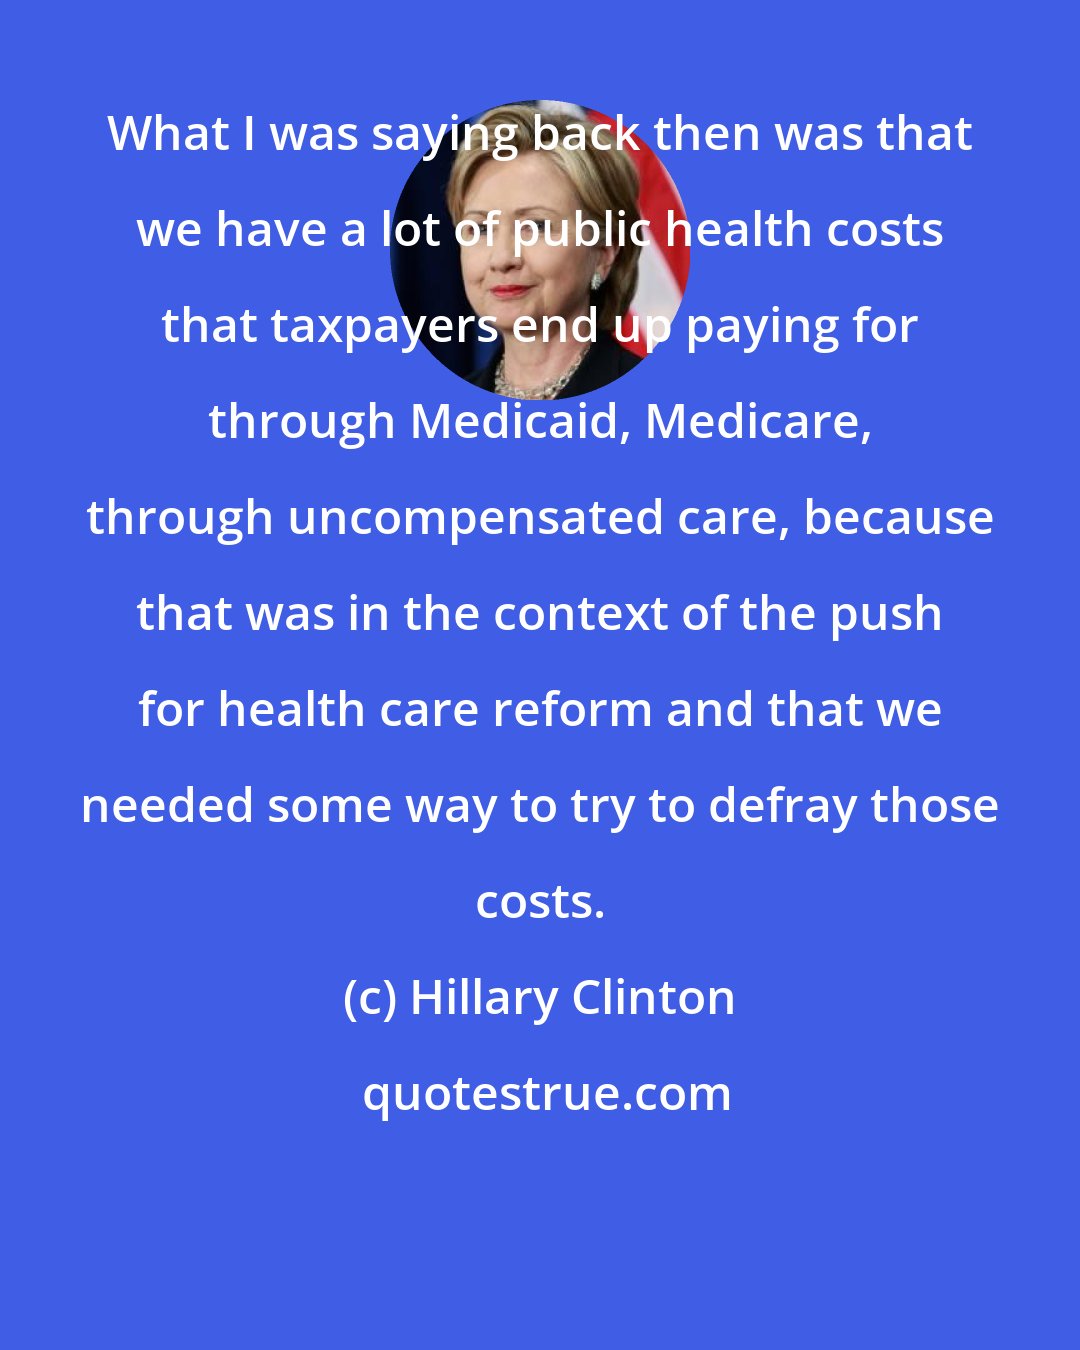 Hillary Clinton: What I was saying back then was that we have a lot of public health costs that taxpayers end up paying for through Medicaid, Medicare, through uncompensated care, because that was in the context of the push for health care reform and that we needed some way to try to defray those costs.